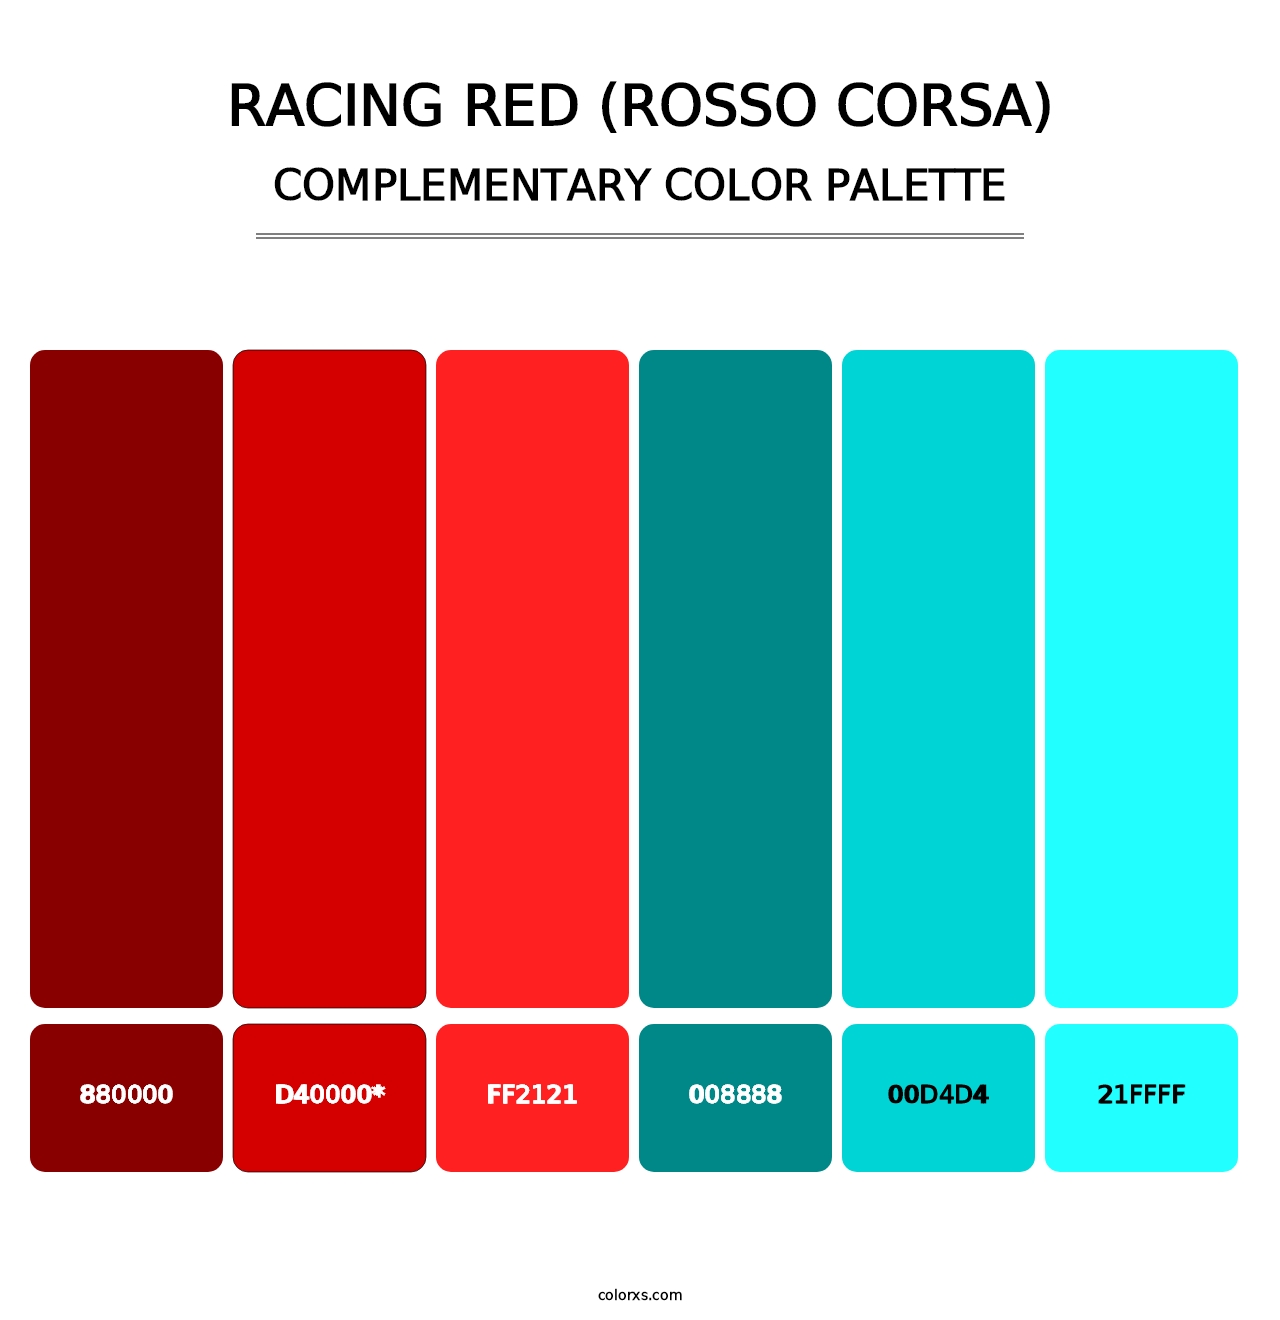 Racing Red (Rosso Corsa) - Complementary Color Palette